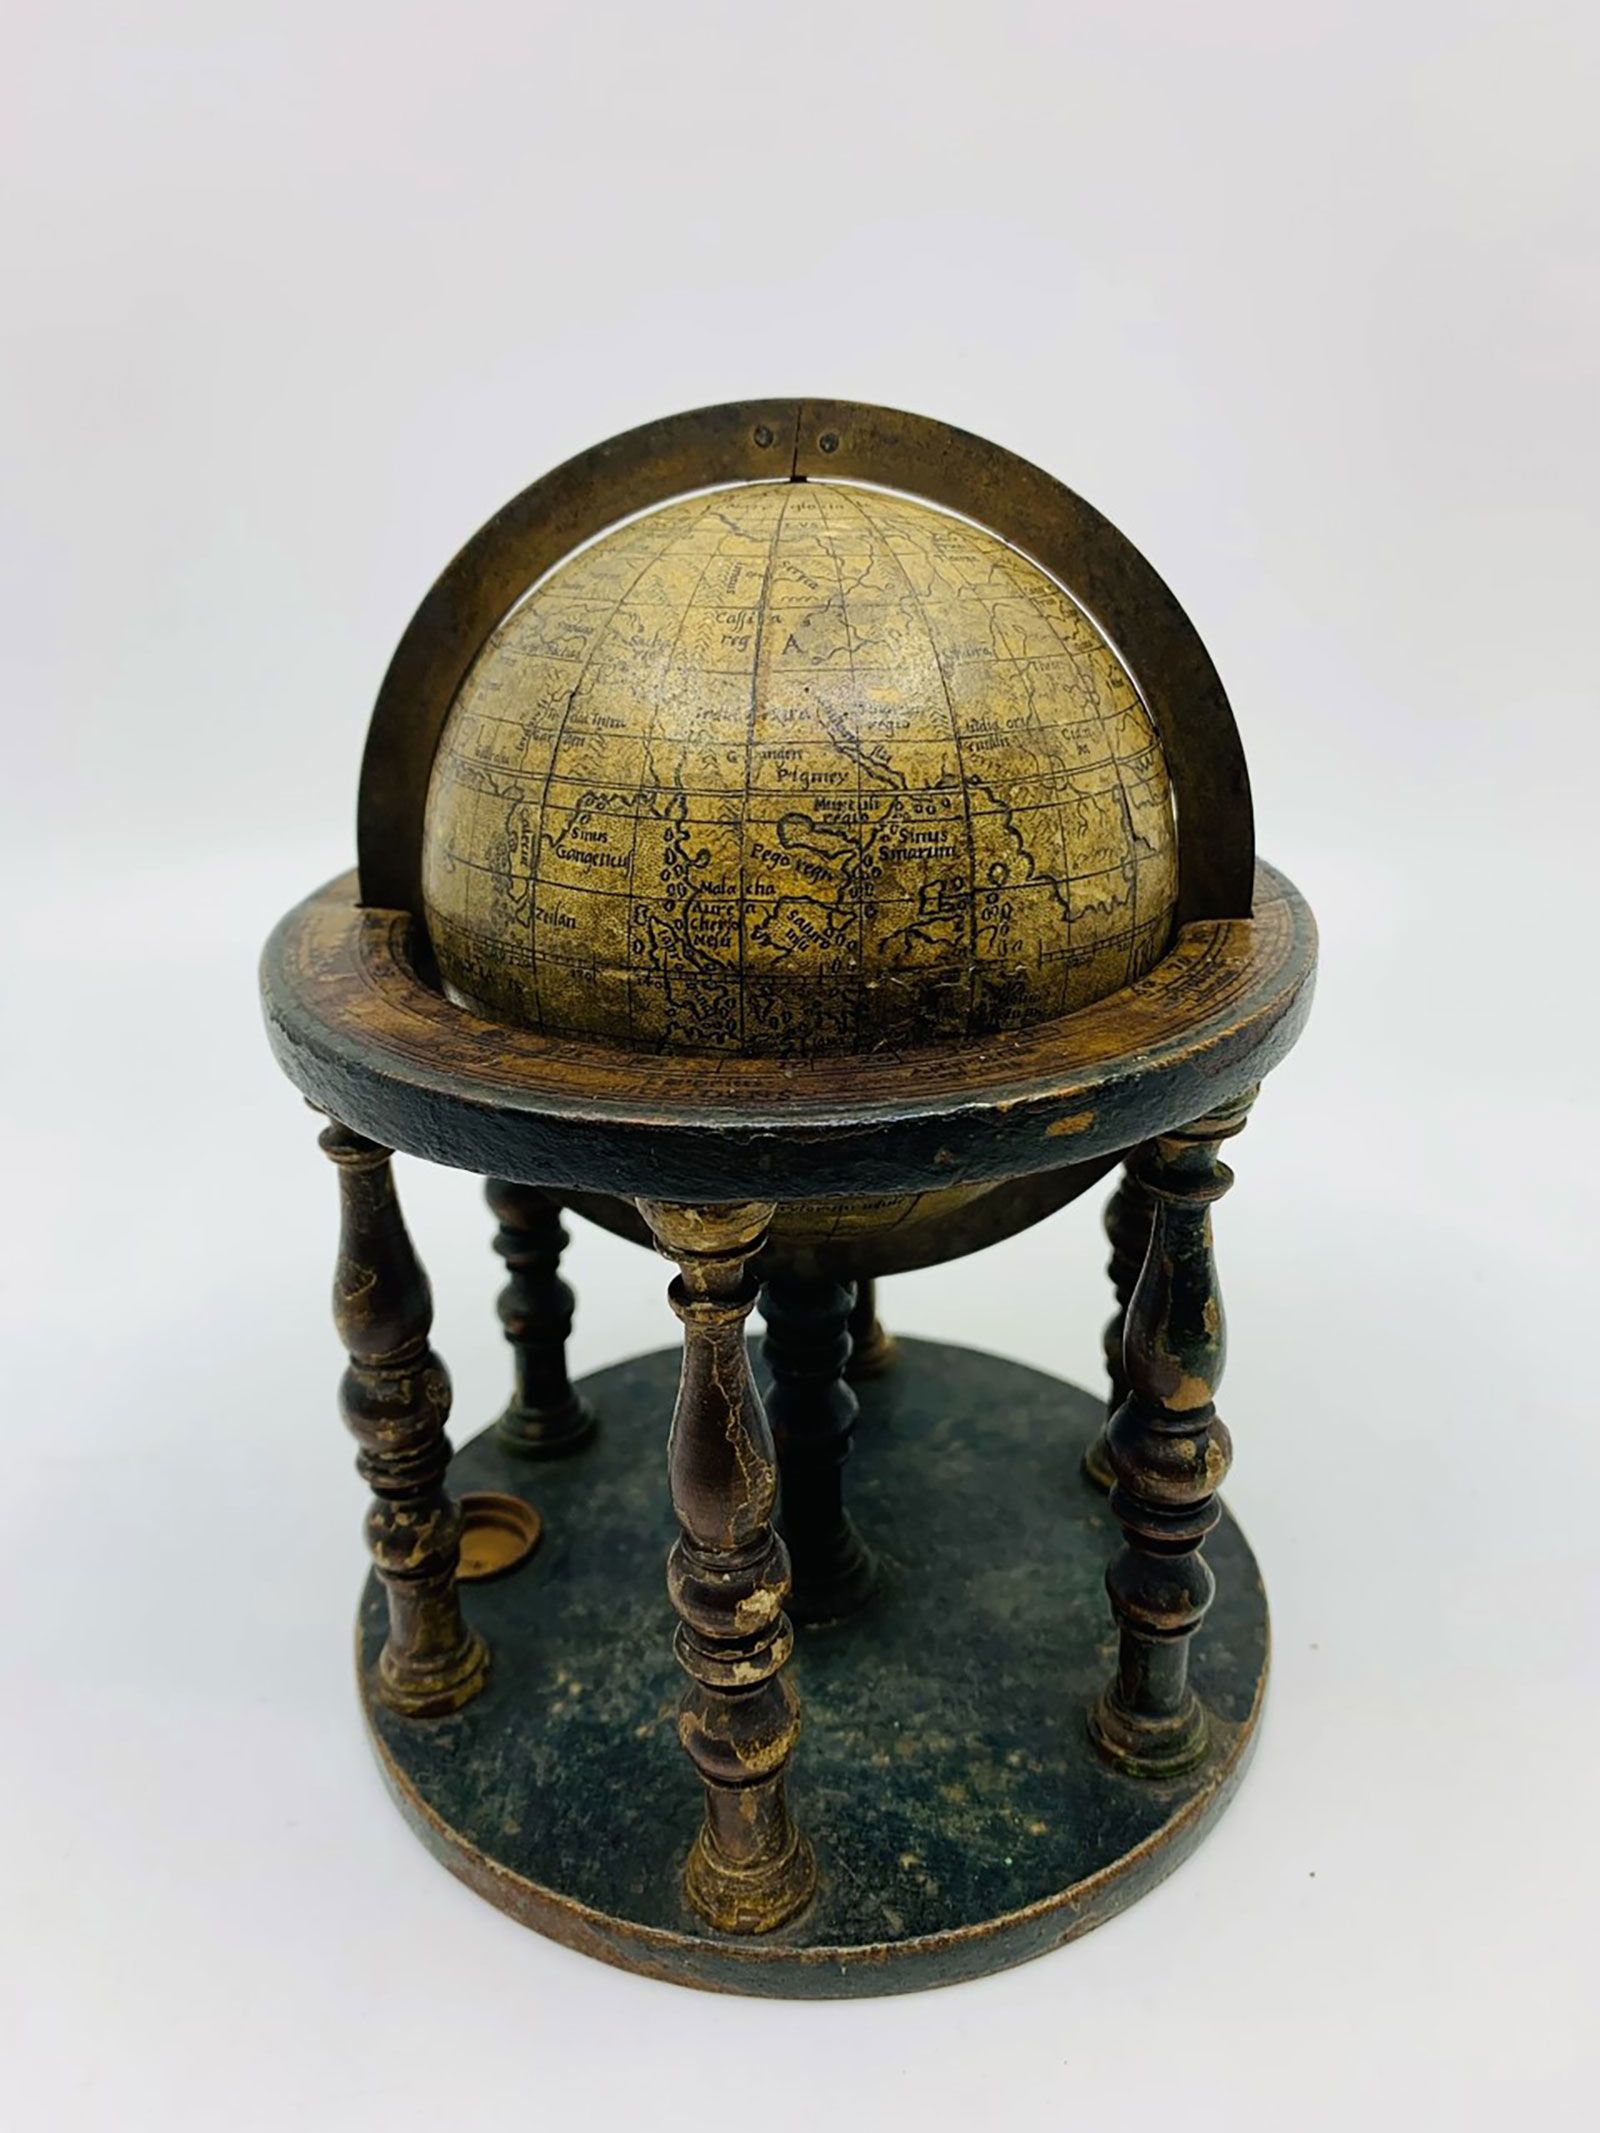 How old is the oldest globe?